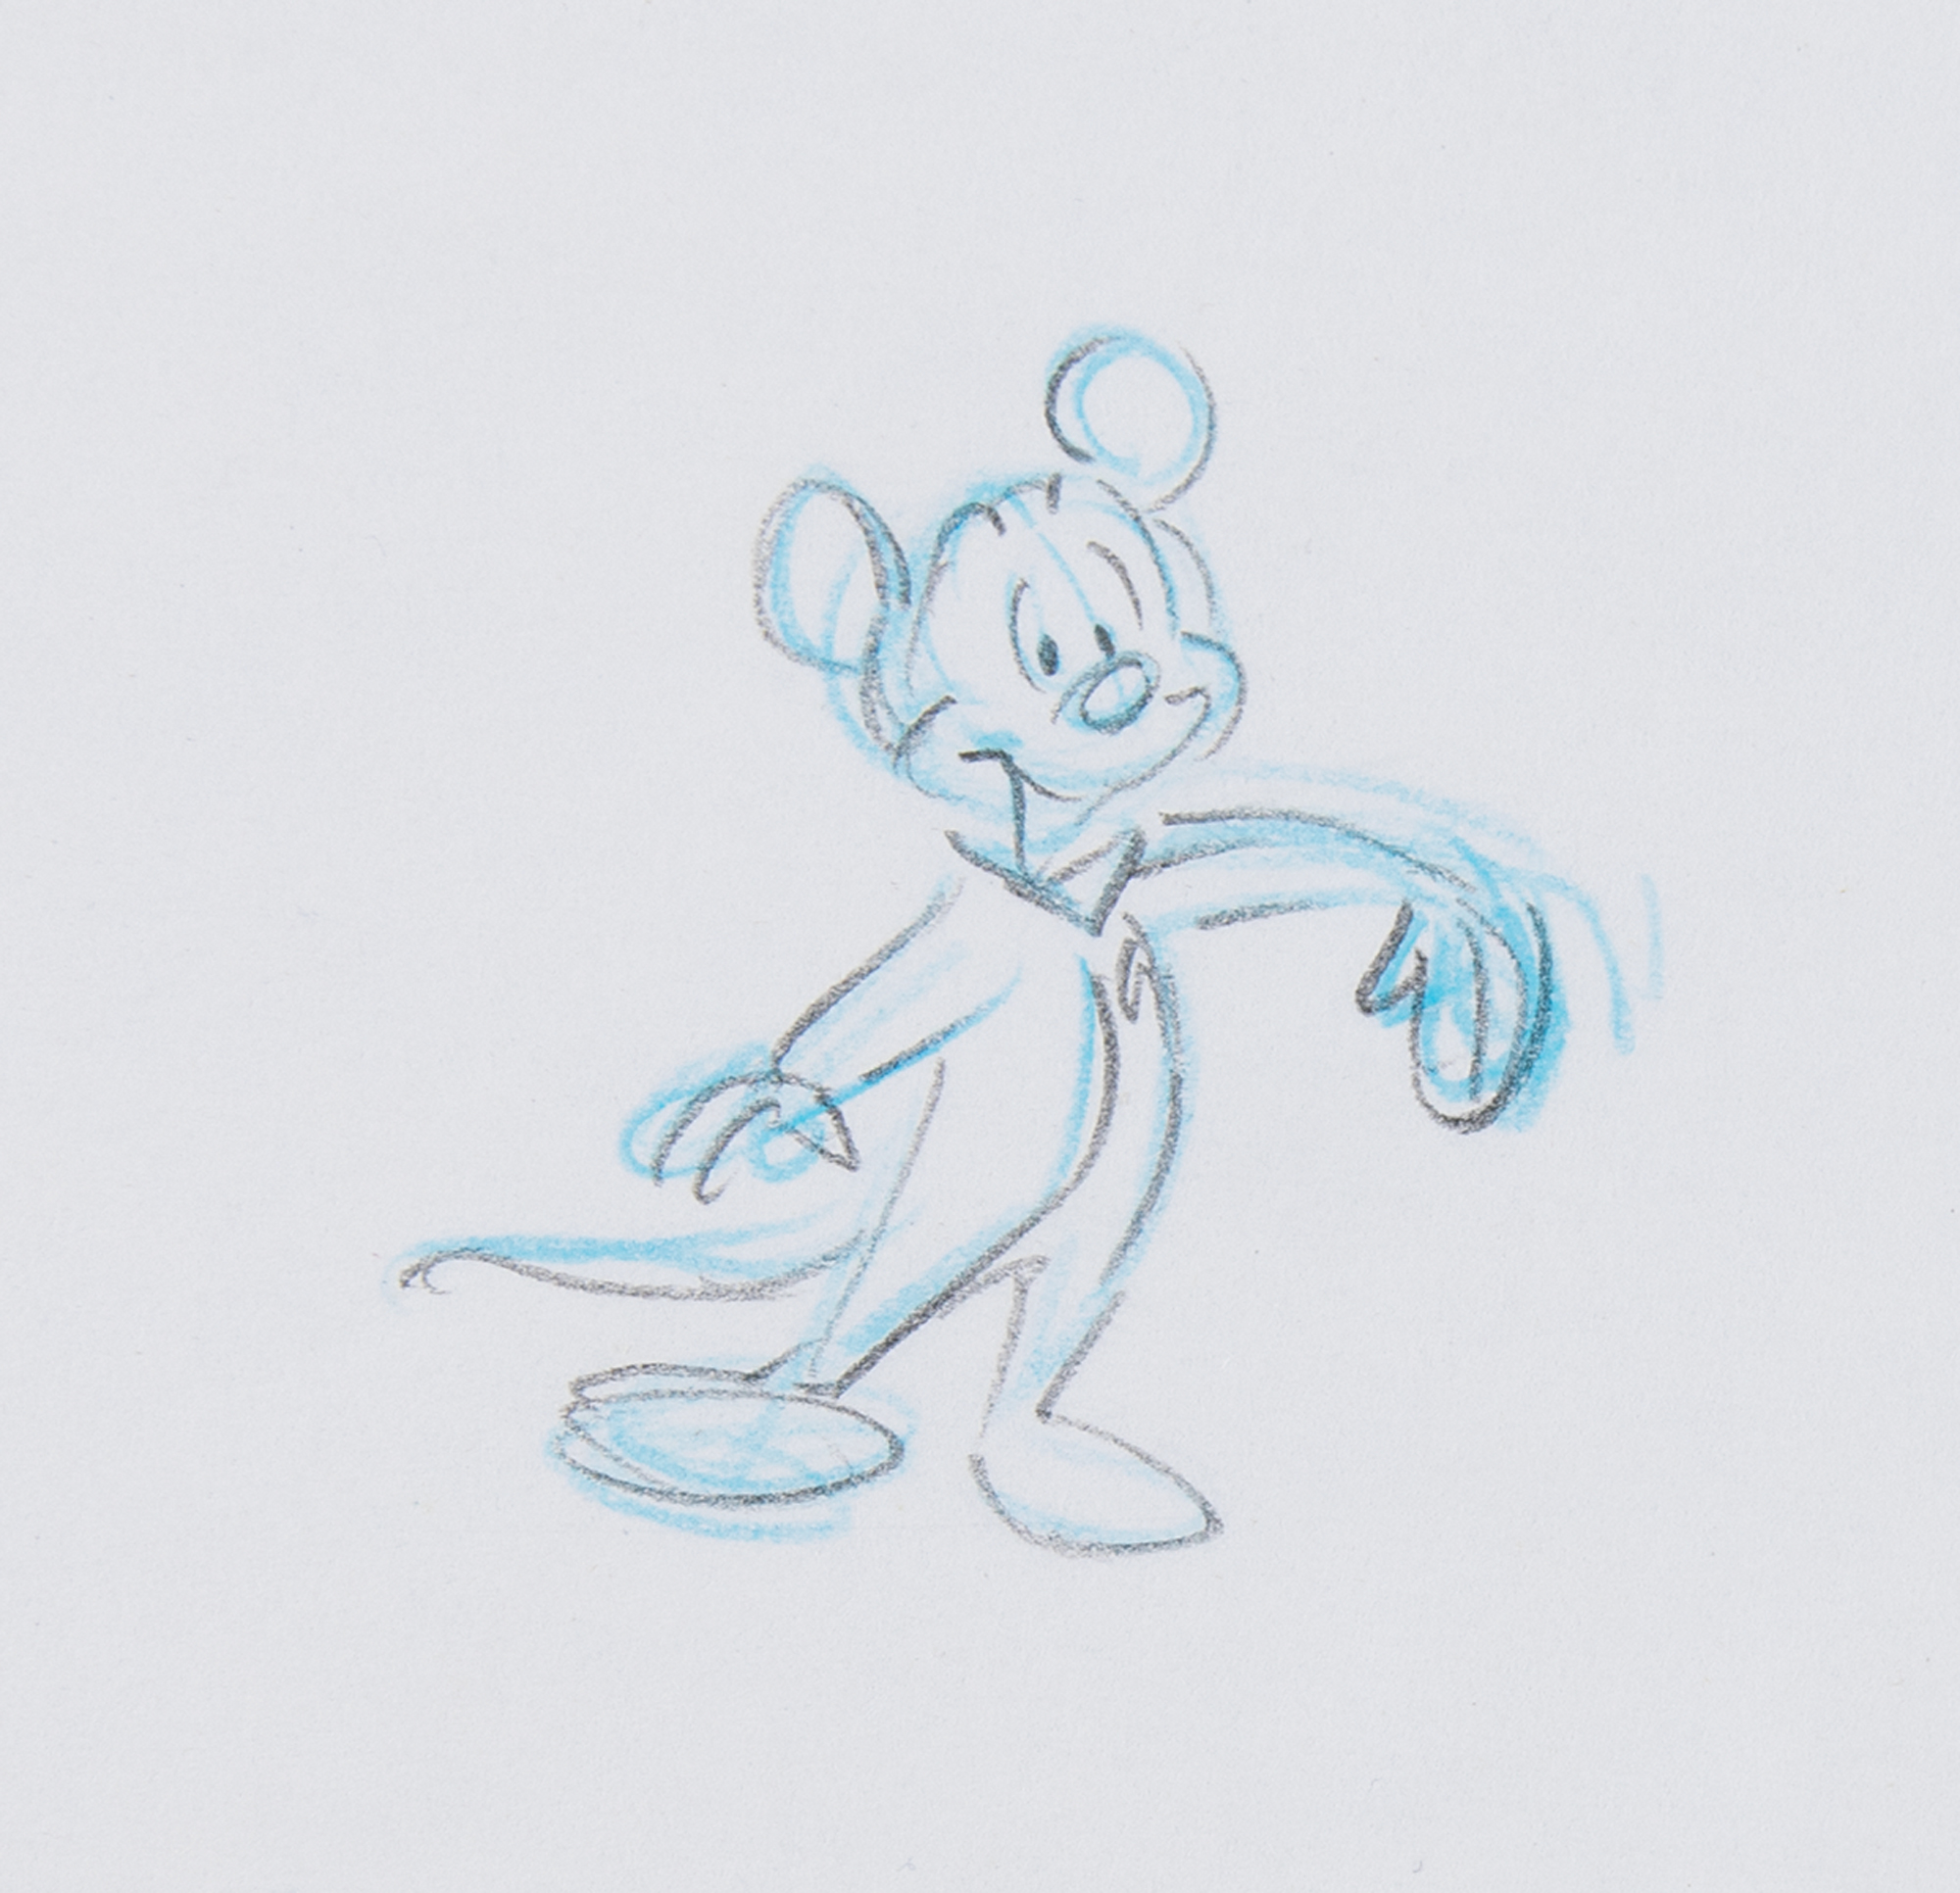 How To Draw Mickey Mouse for Beginners - YouTube